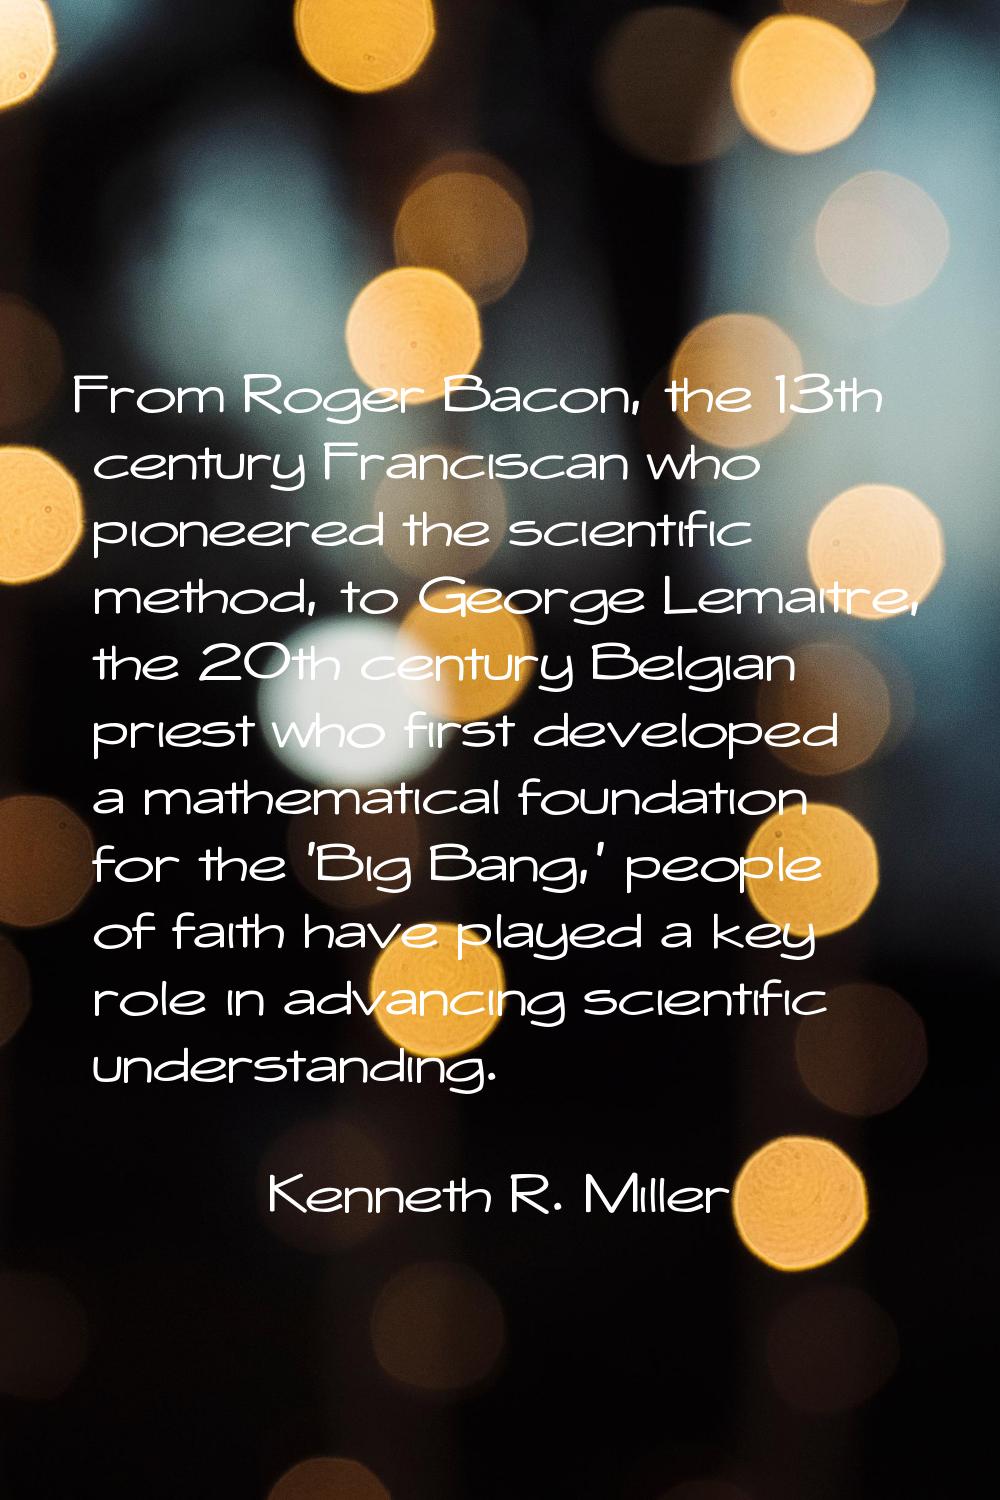 From Roger Bacon, the 13th century Franciscan who pioneered the scientific method, to George Lemait